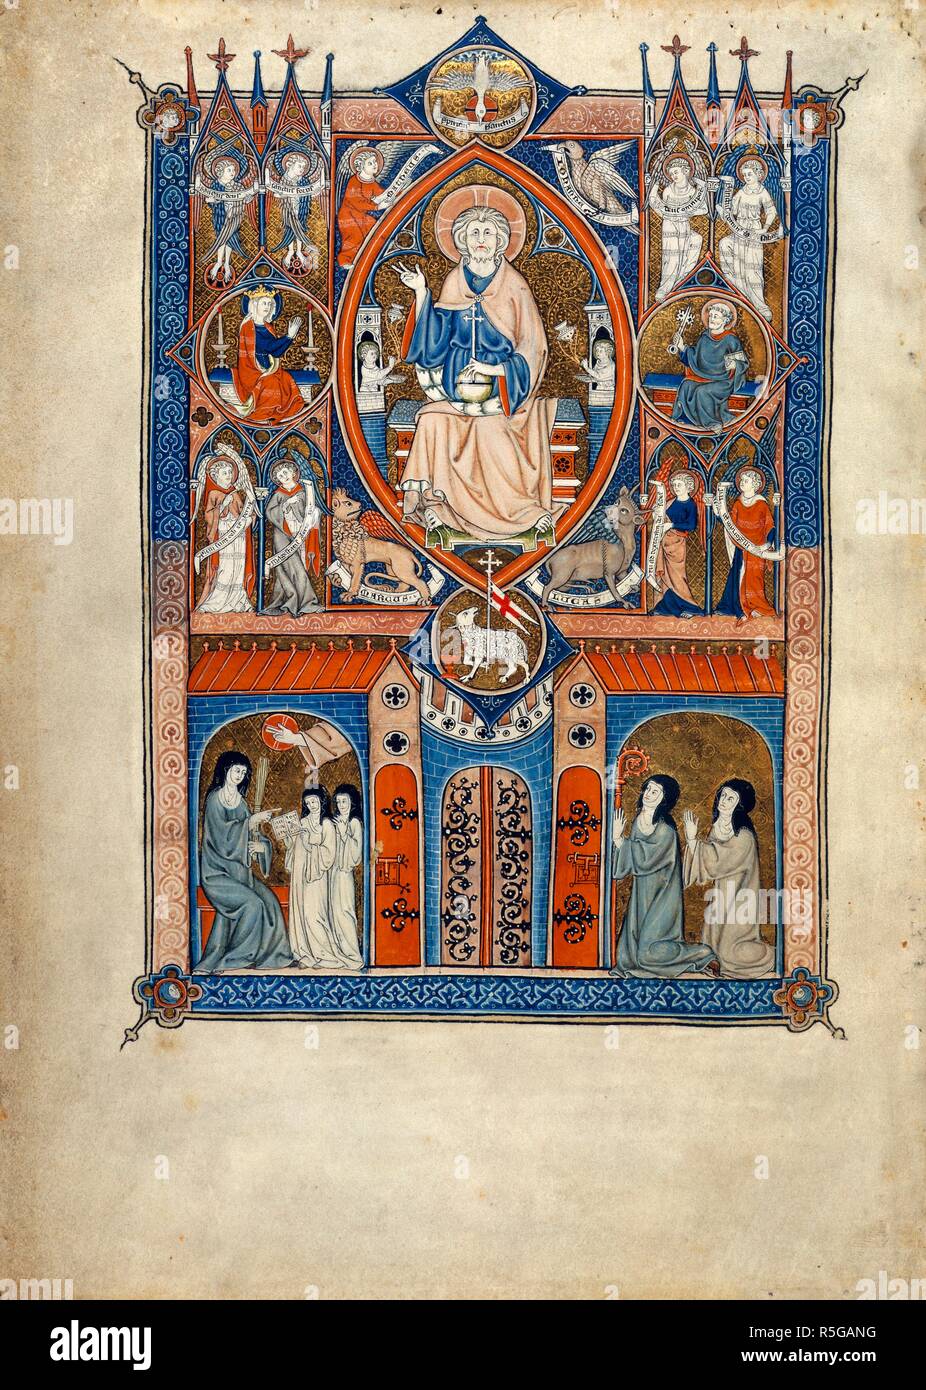 Ideal state of the Sainte Abbaye. La Sainte Abbaye. France [Paris or Maubuisson?]; between 1290 and 12. [Whole folio] In centre, God in mandorla, blessing, and holding an orb, with the Holy Spirit above, and the Paschal Lamb below. Either side, the Virgin and St Peter; and in the corners, the Evangelists' symbols, and seraphs and angels holding rolls. Below; a tower with battlements and elaborate ironwork. On left, Mistress of the Novices with birch rod, and two novices. On right; the abbess and a nun kneel, looking up at the Lamb  Image taken from La Sainte Abbaye.  Originally published/produ Stock Photo